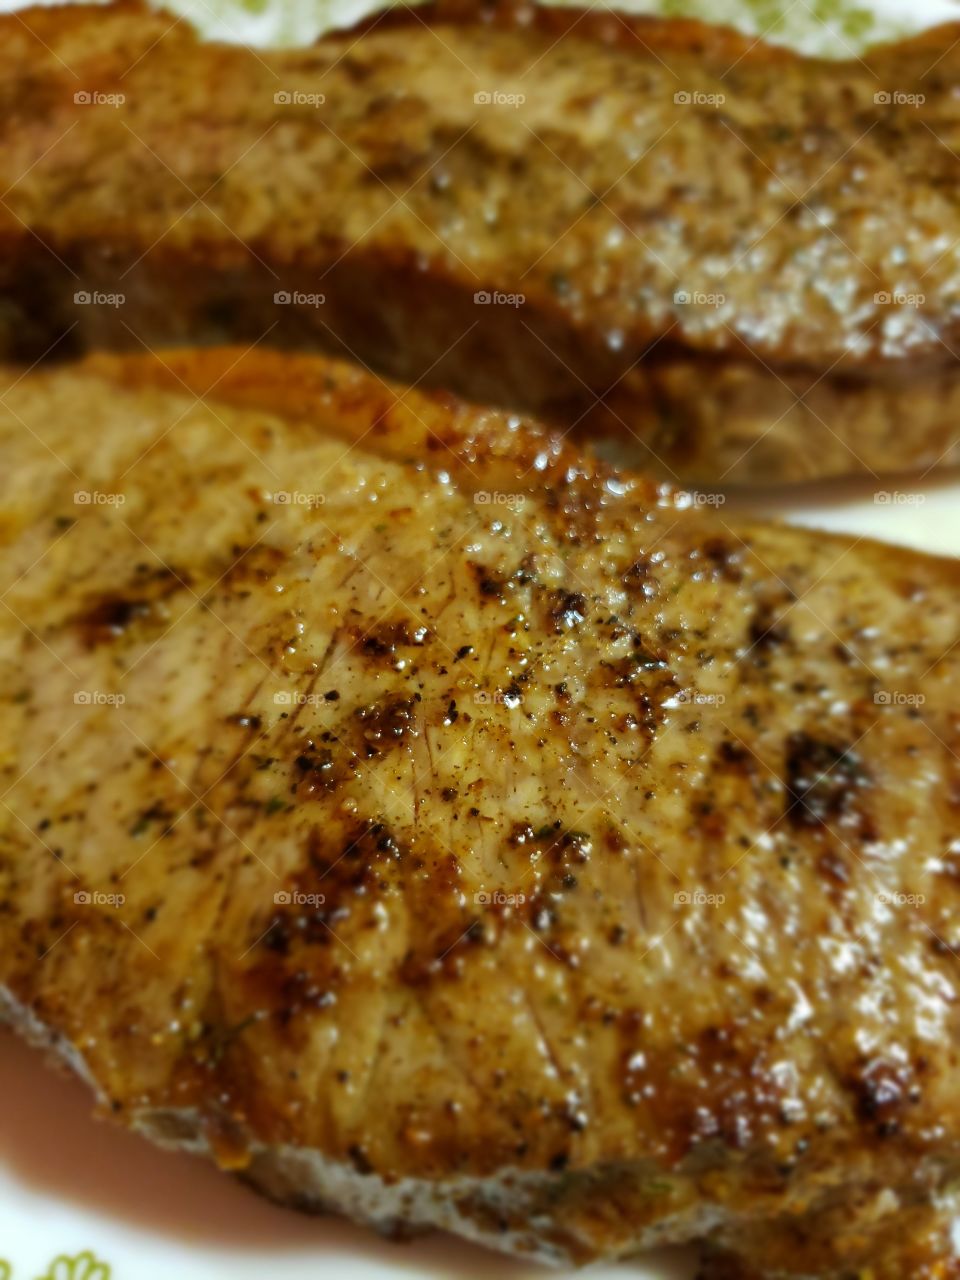 New York strip steak grilled to medium rare. A classic American good that had delighted citizens for years.